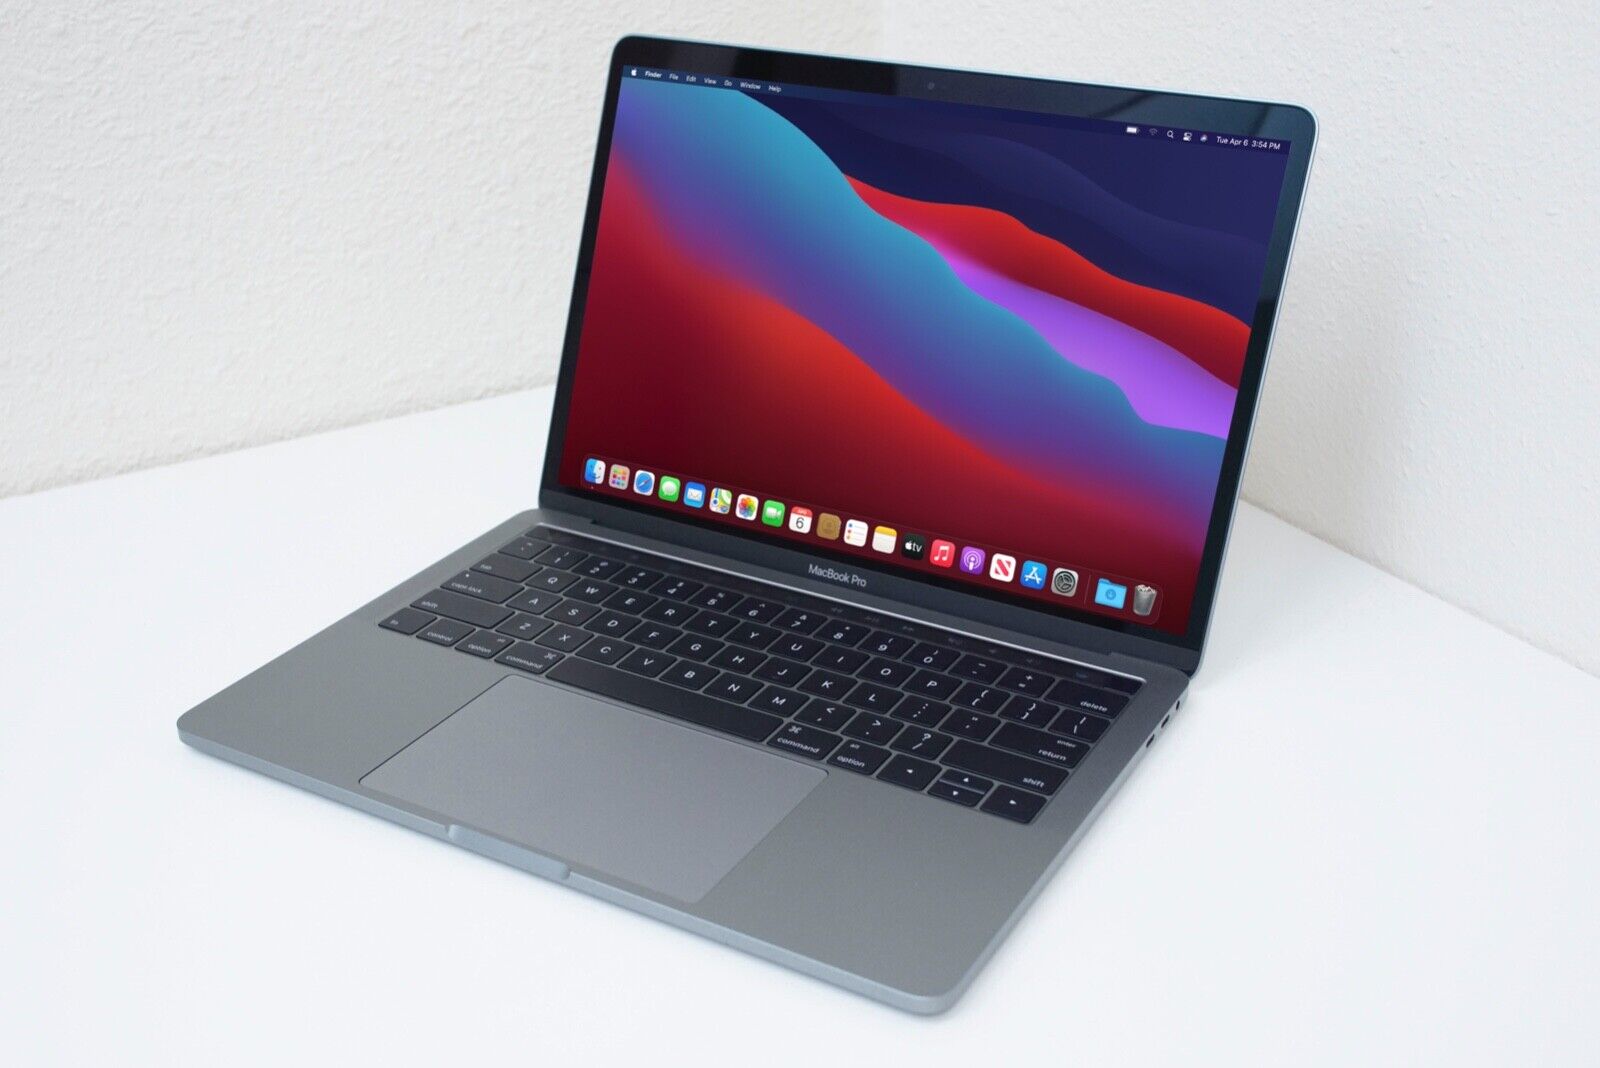 Apple MacBook Pro 13 Inch 2.8 GHz i7 512GB SSD 16GB RAM 2019 Touch Bar  STRONG